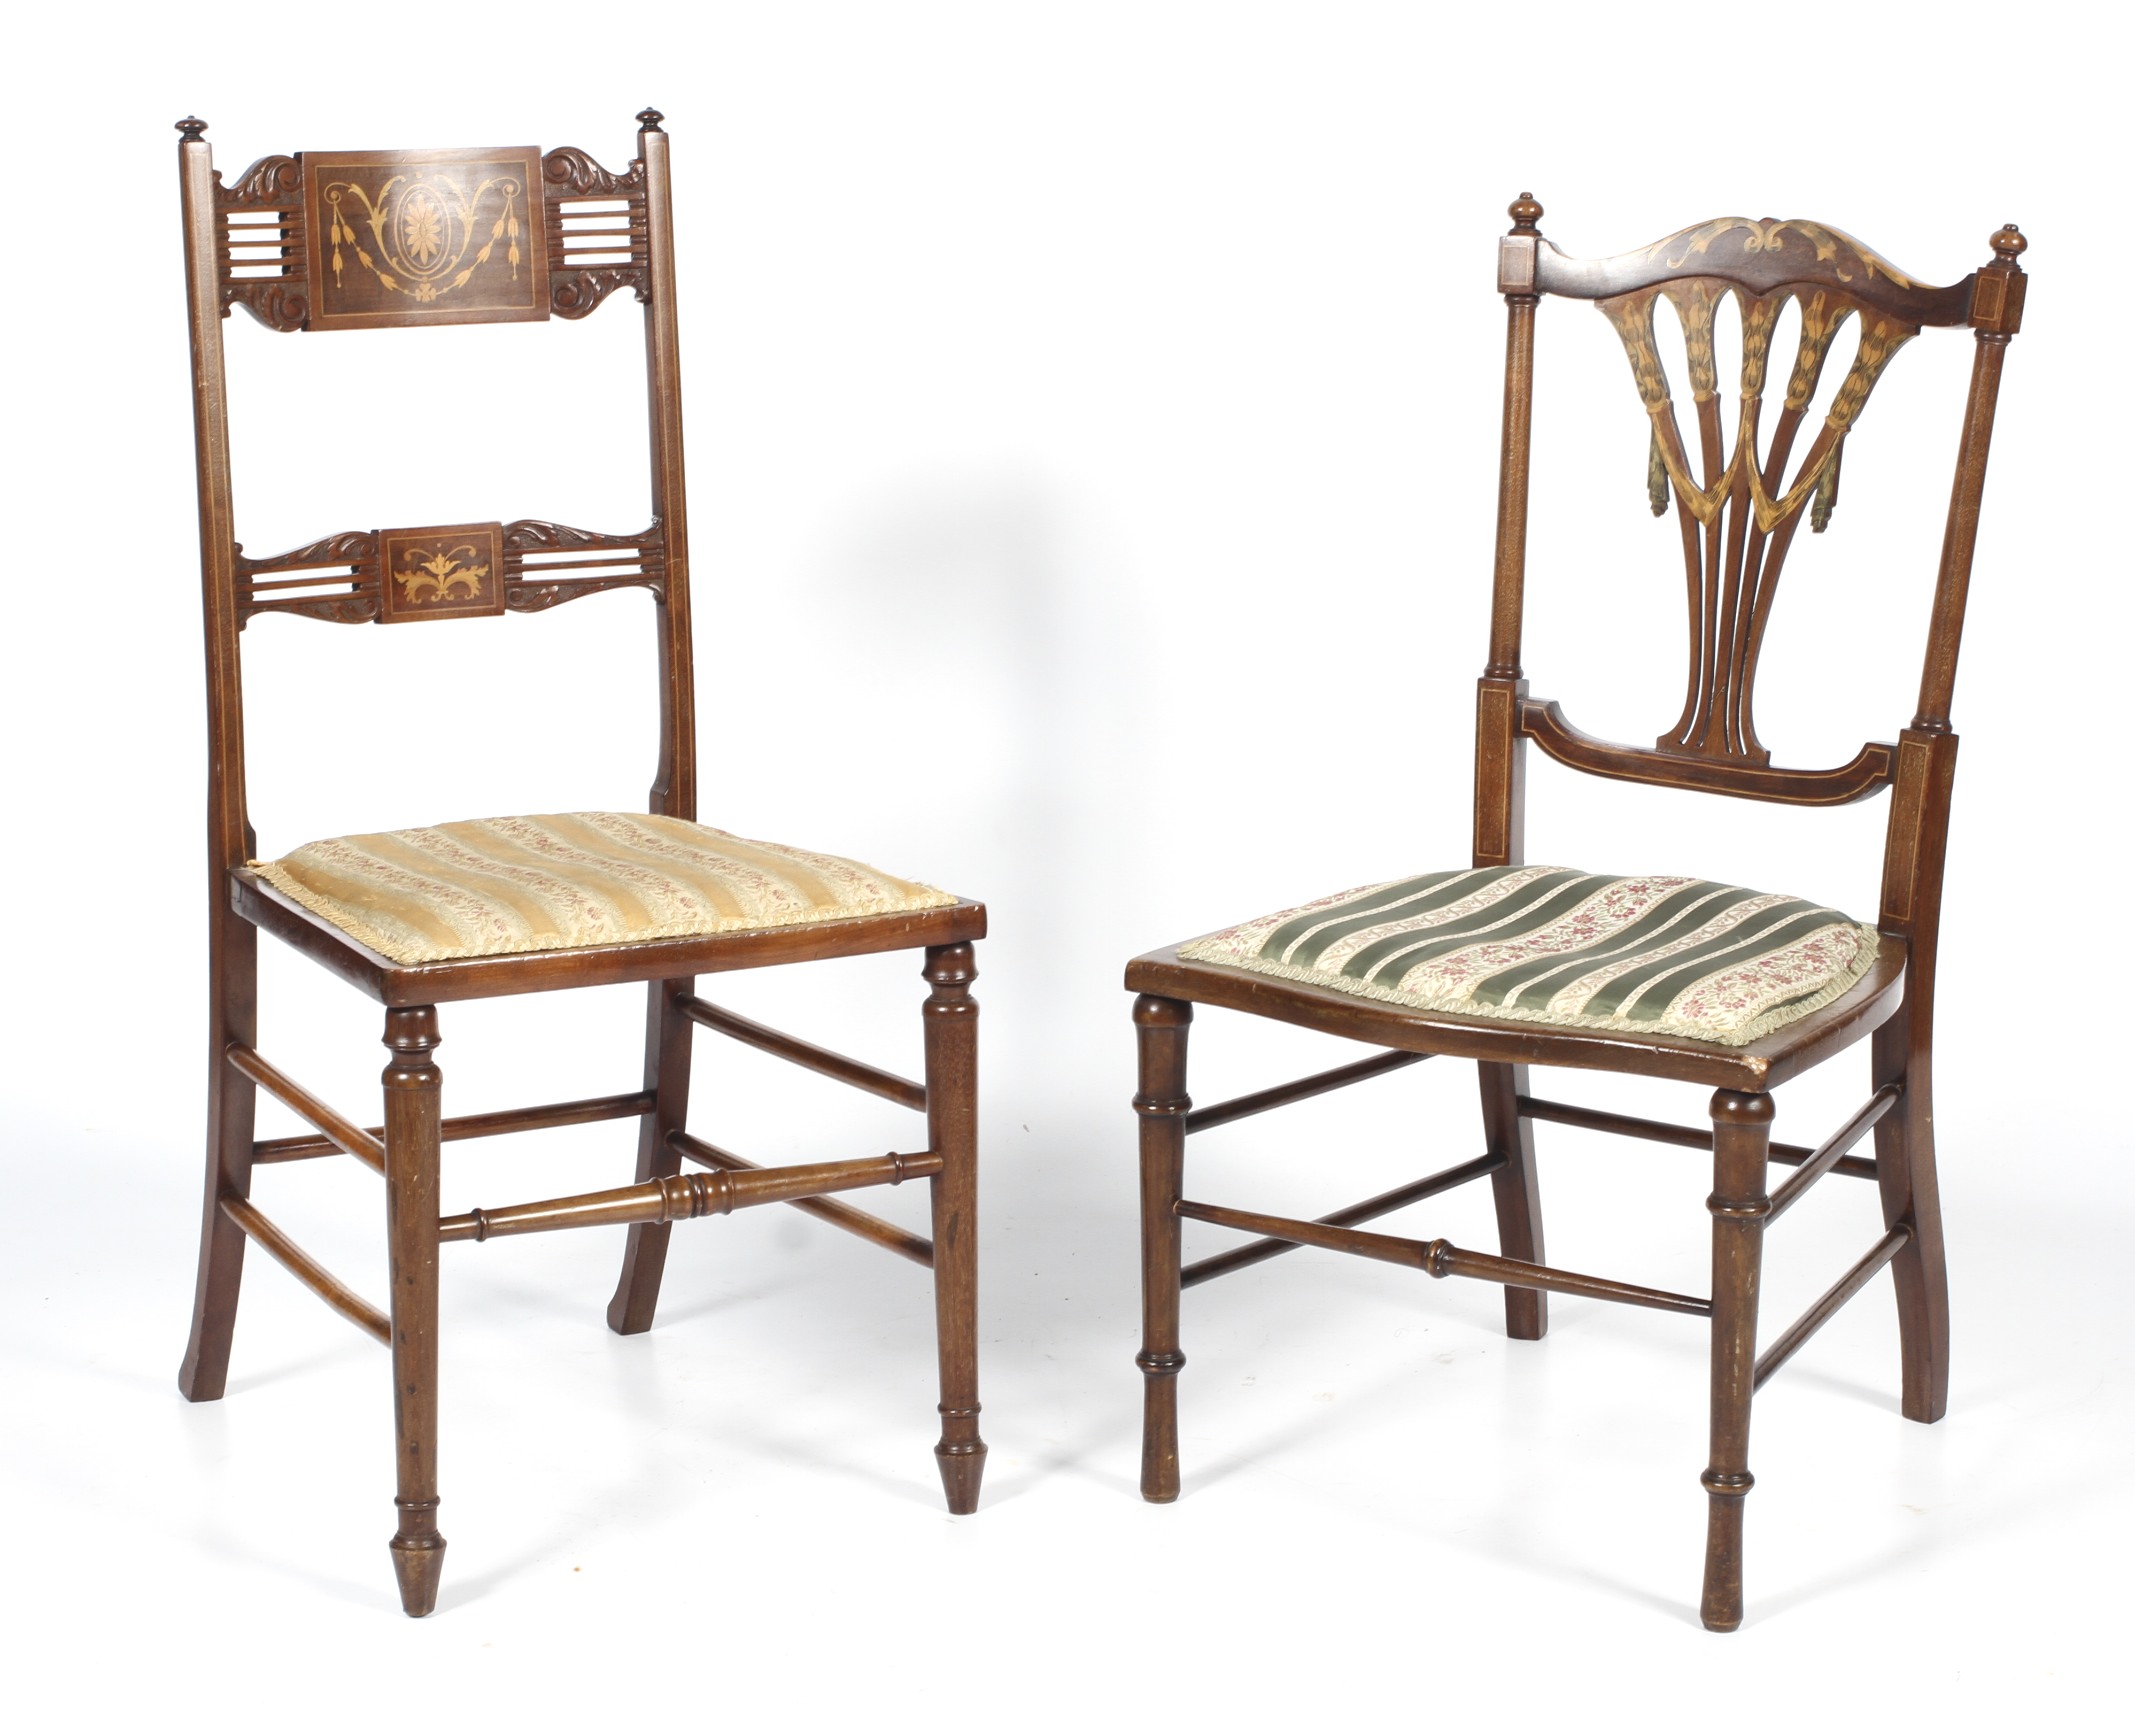 Two Edwardian inlaid mahogany bedroom chairs.